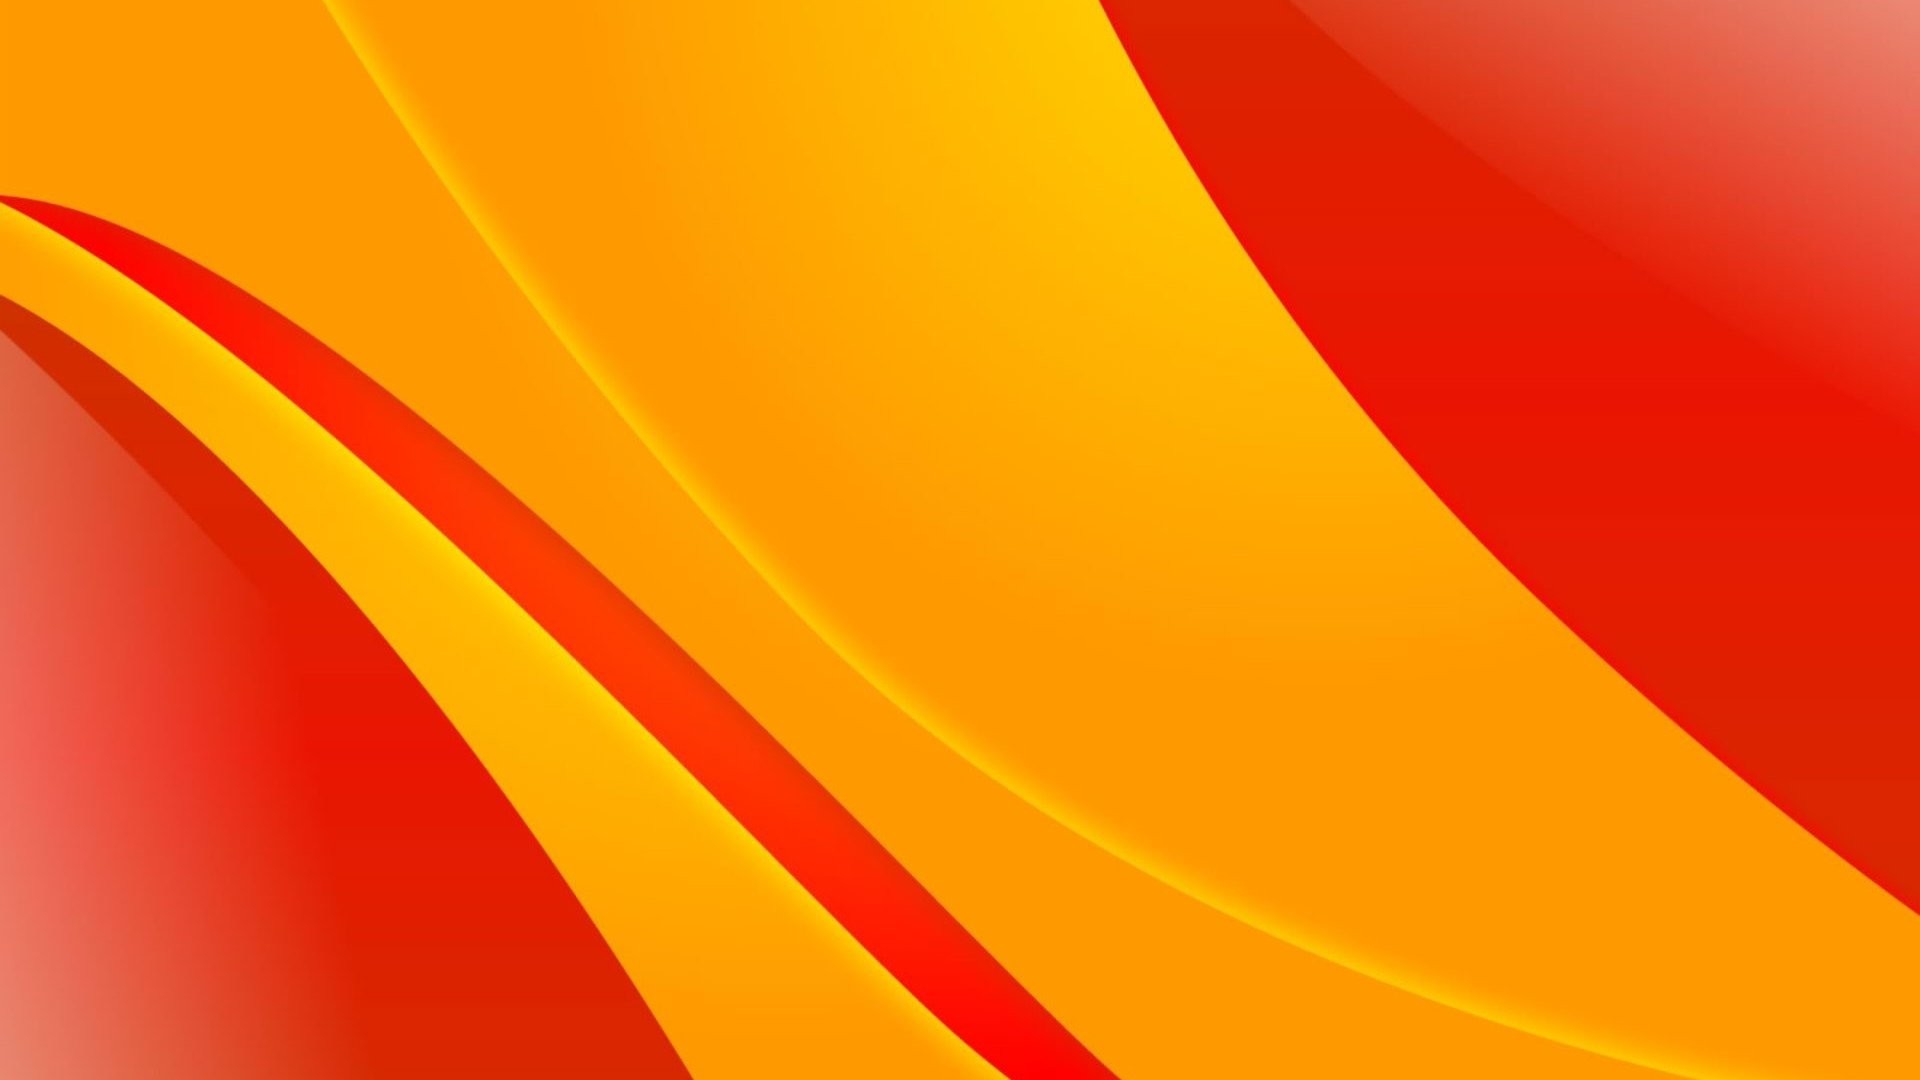 Red Yellow Mix Background - 1920x1080 Wallpaper 